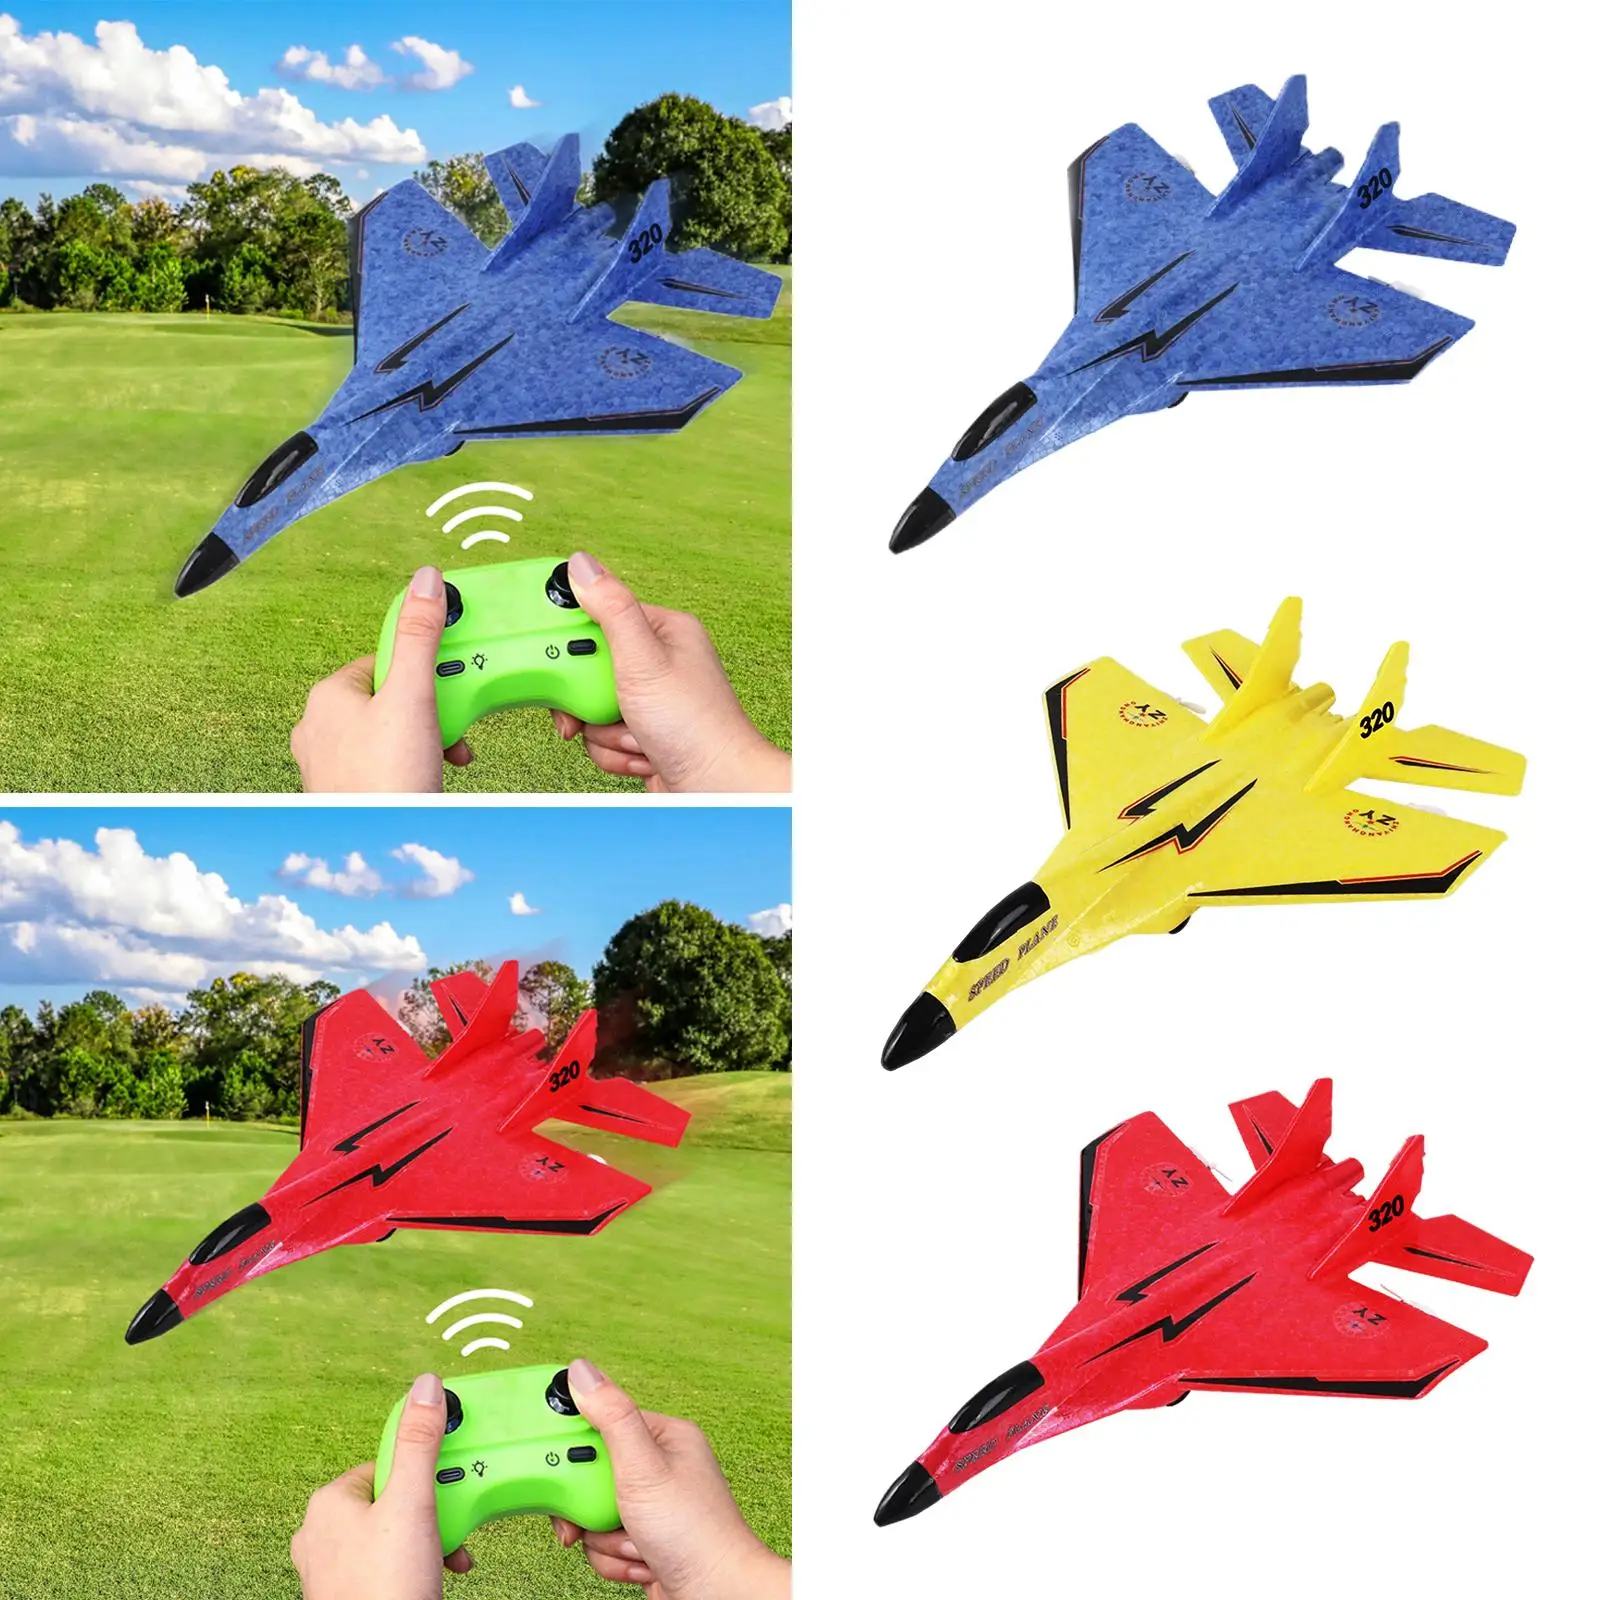 RC Plane to Control Portable Lightweight with Light Foam RC Airplane Hobby RC Glider for Adults Kids Beginner Boys Girls